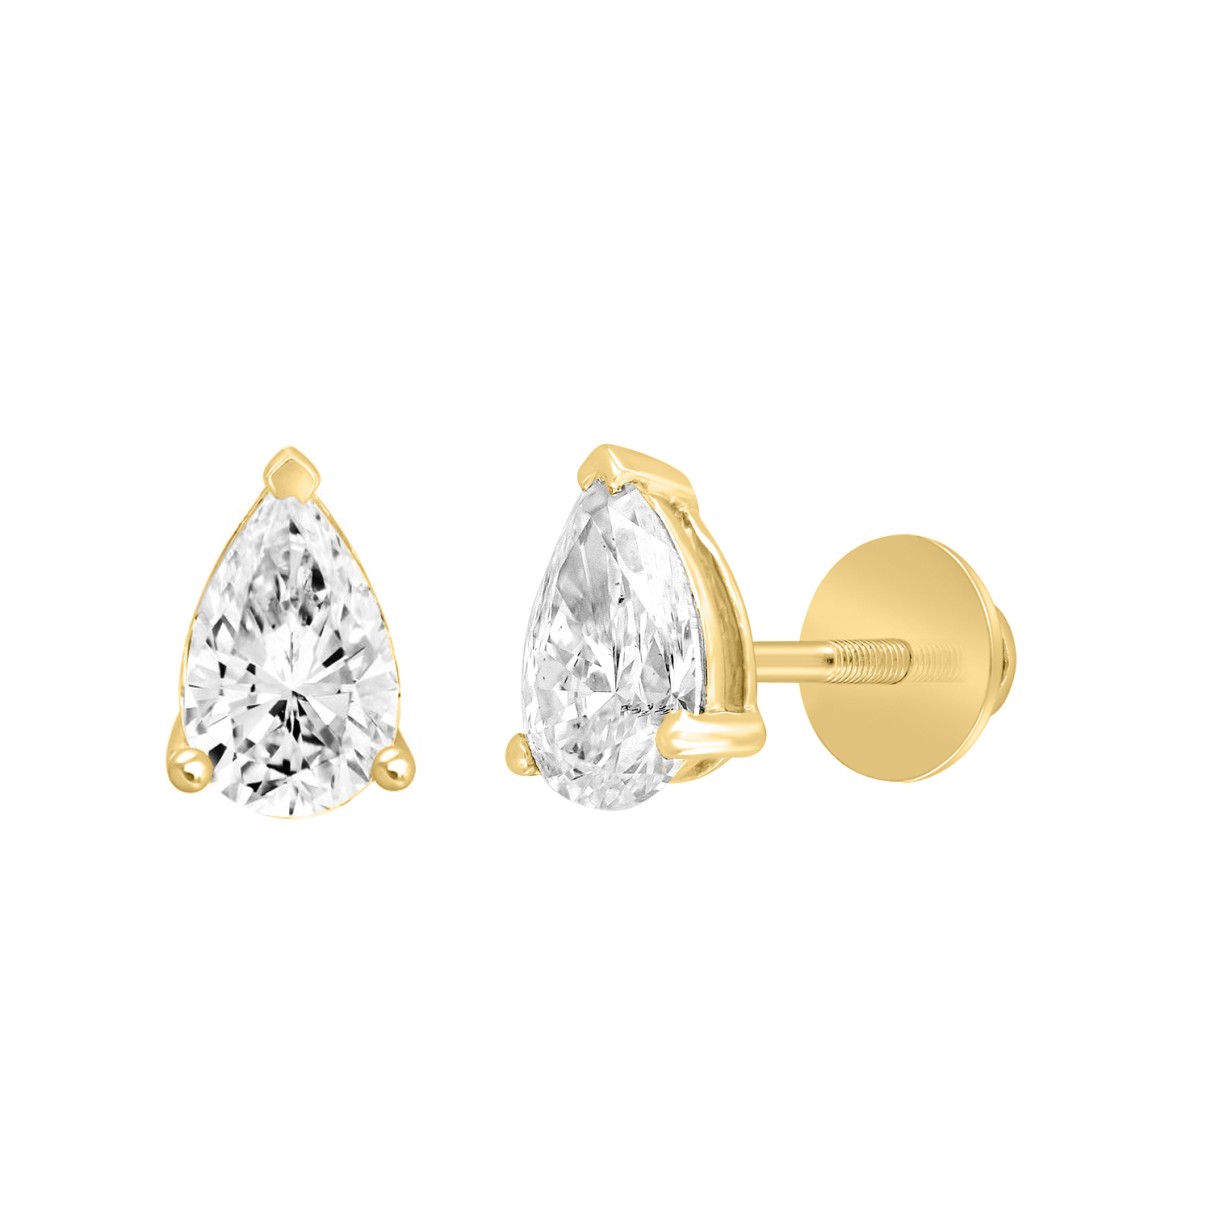 LADIES SOLITAIRE EARRINGS  1/2CT PEAR DIAMOND 14K YELLOW GOLD